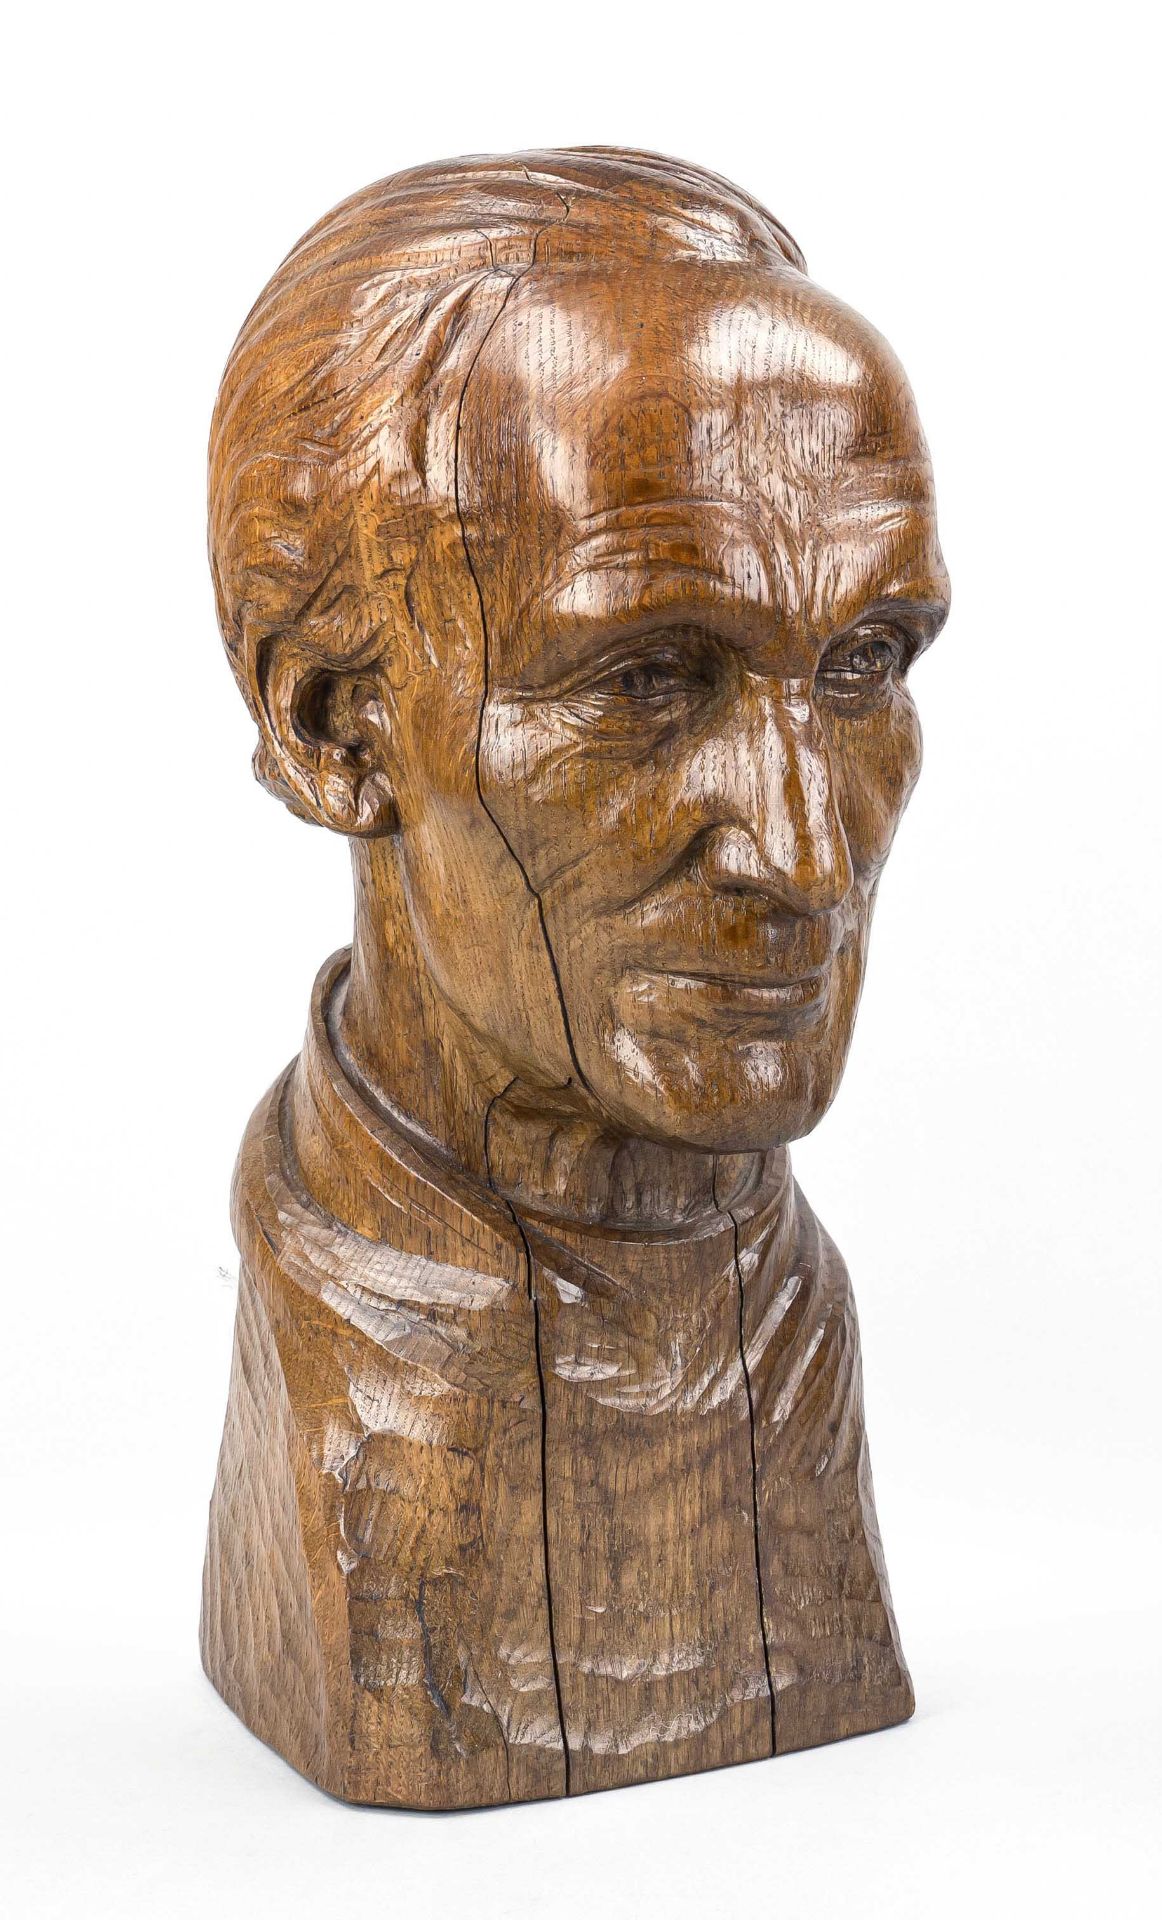 Jean Boedts (1904-1973), life-size bust of a man, light brown stained oak wood, signed and dated